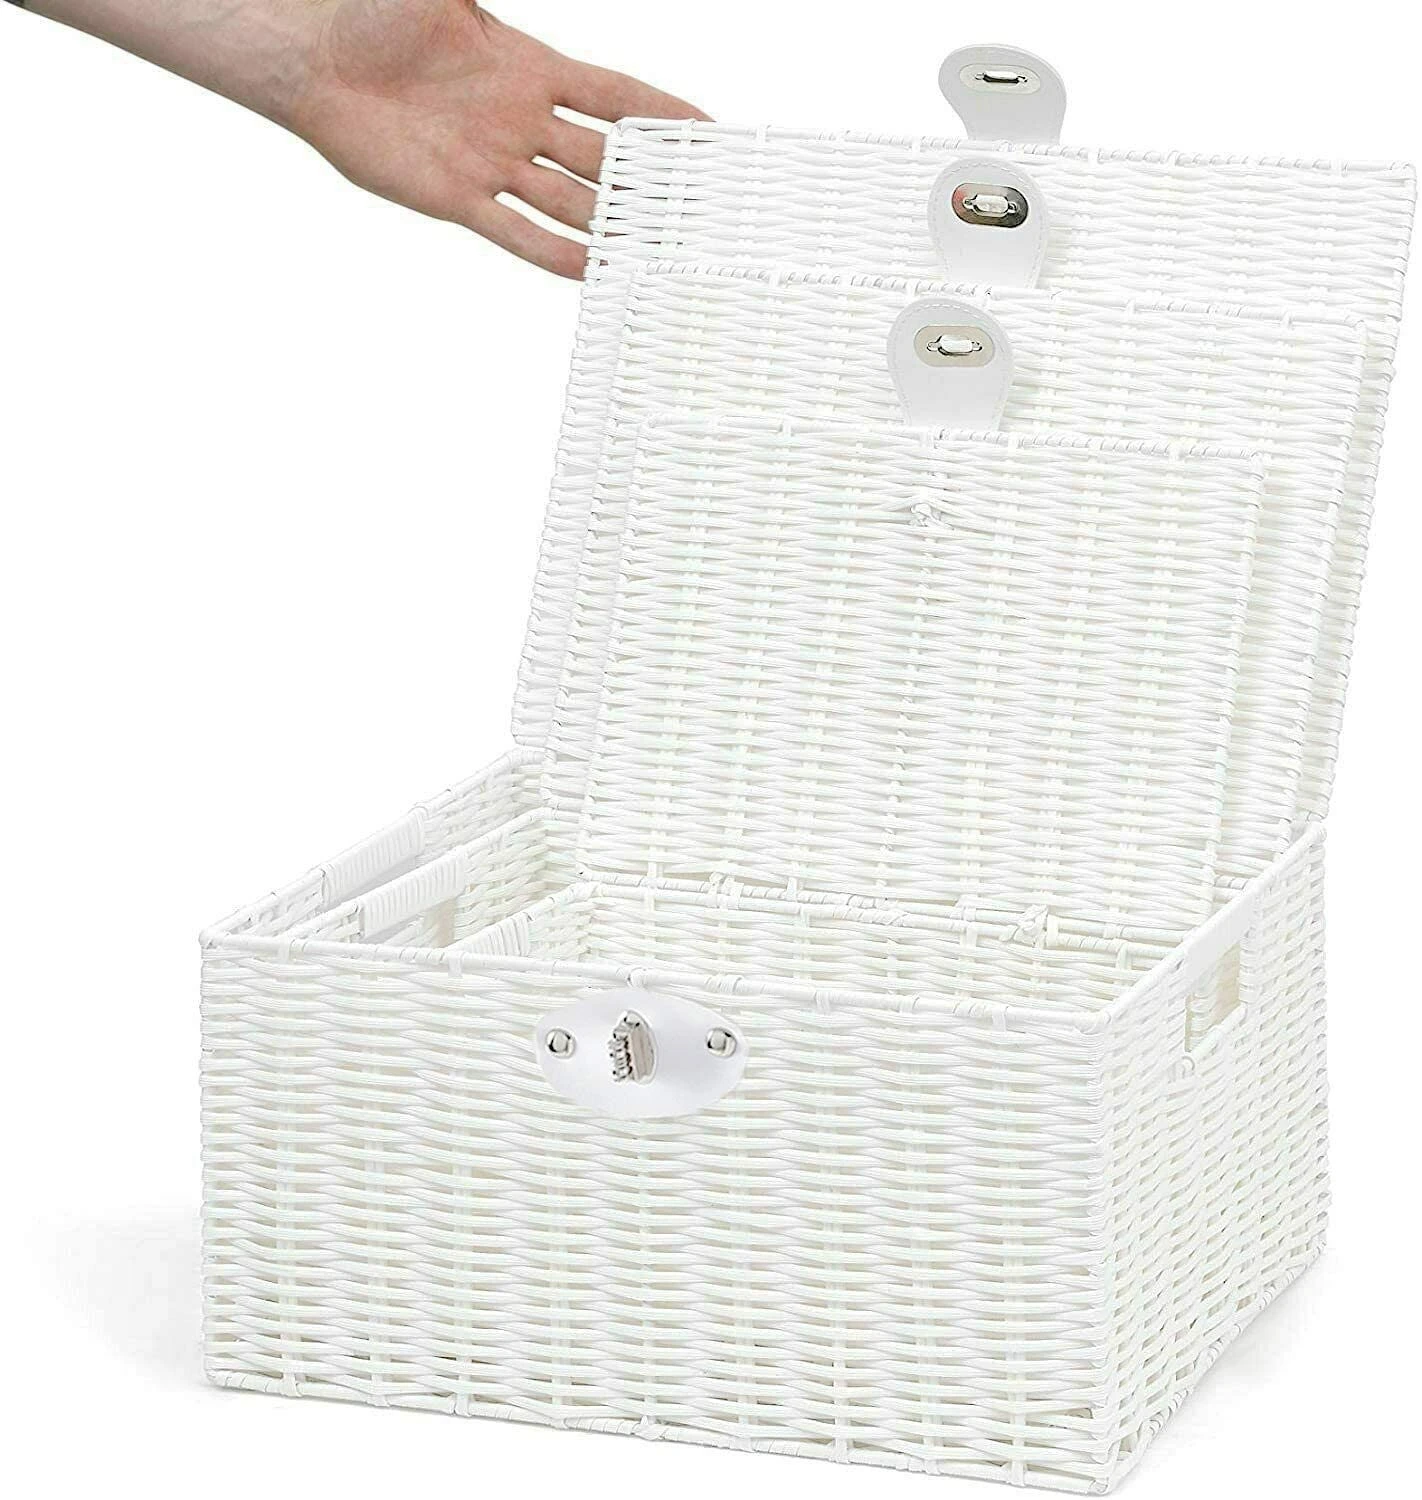 Empty Gift Hampers Resin Hampers Gift Hampers with Lids White Food Customized Storage Basket square